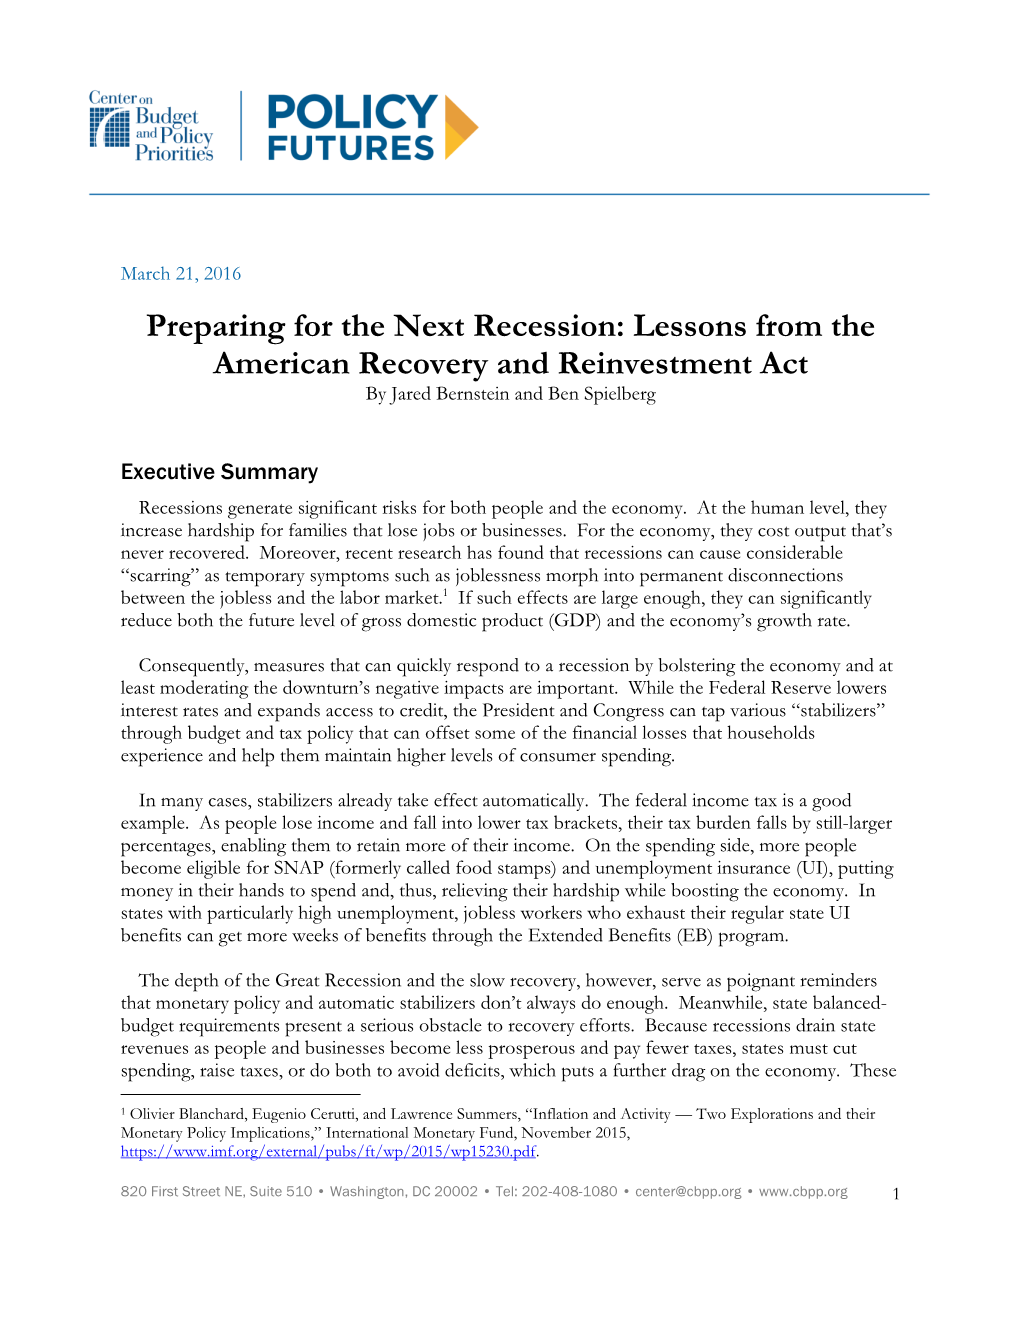 Preparing for the Next Recession: Lessons from the American Recovery and Reinvestment Act by Jared Bernstein and Ben Spielberg